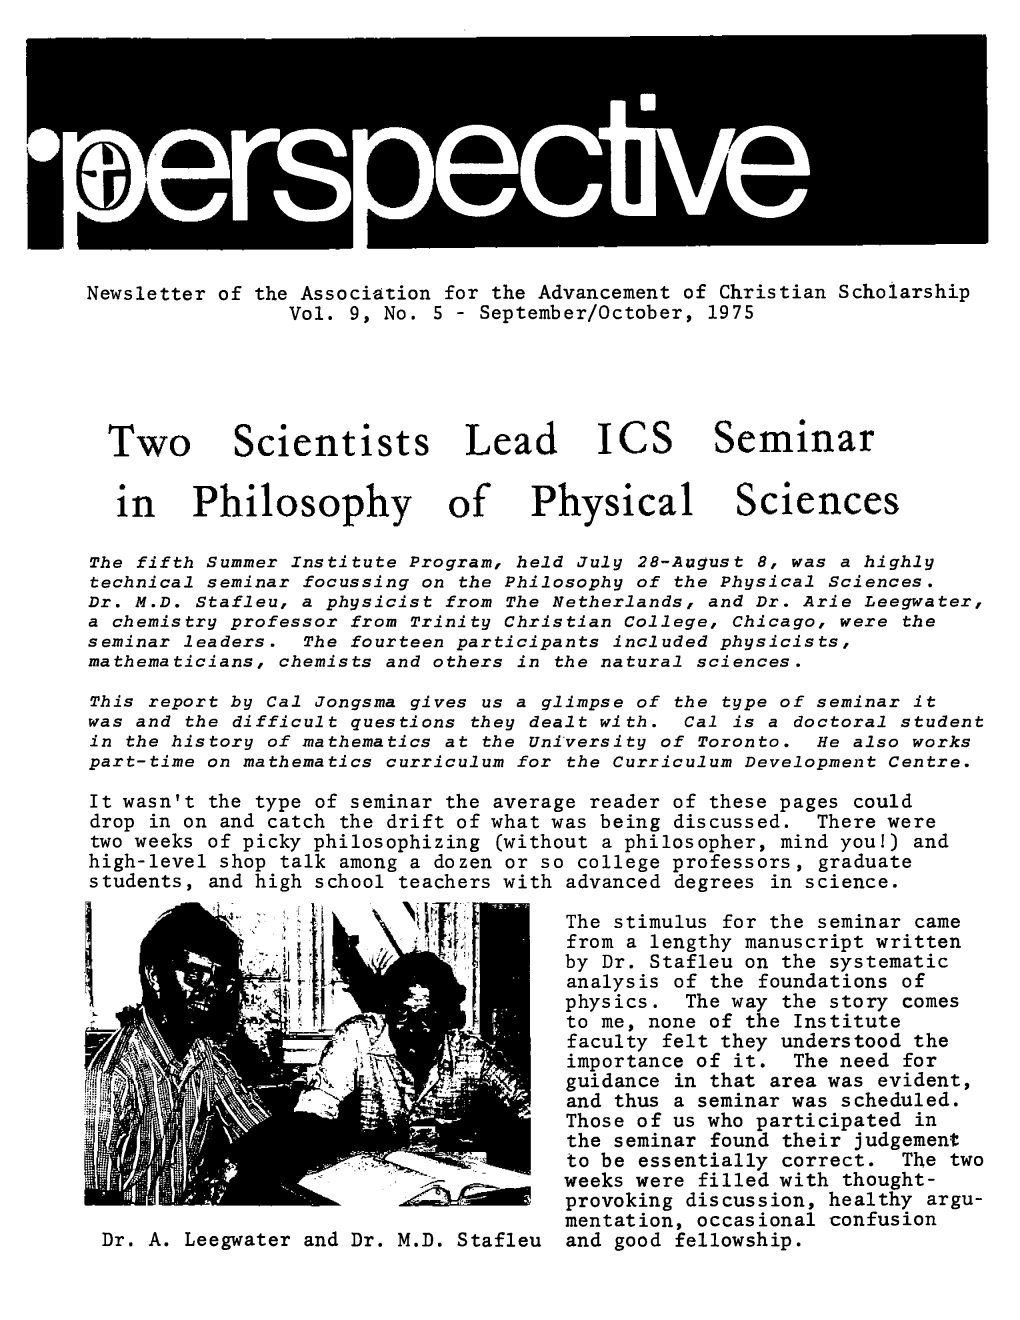 Two Scientists Lead ICS Seminar in Philosophy of Physical Sciences